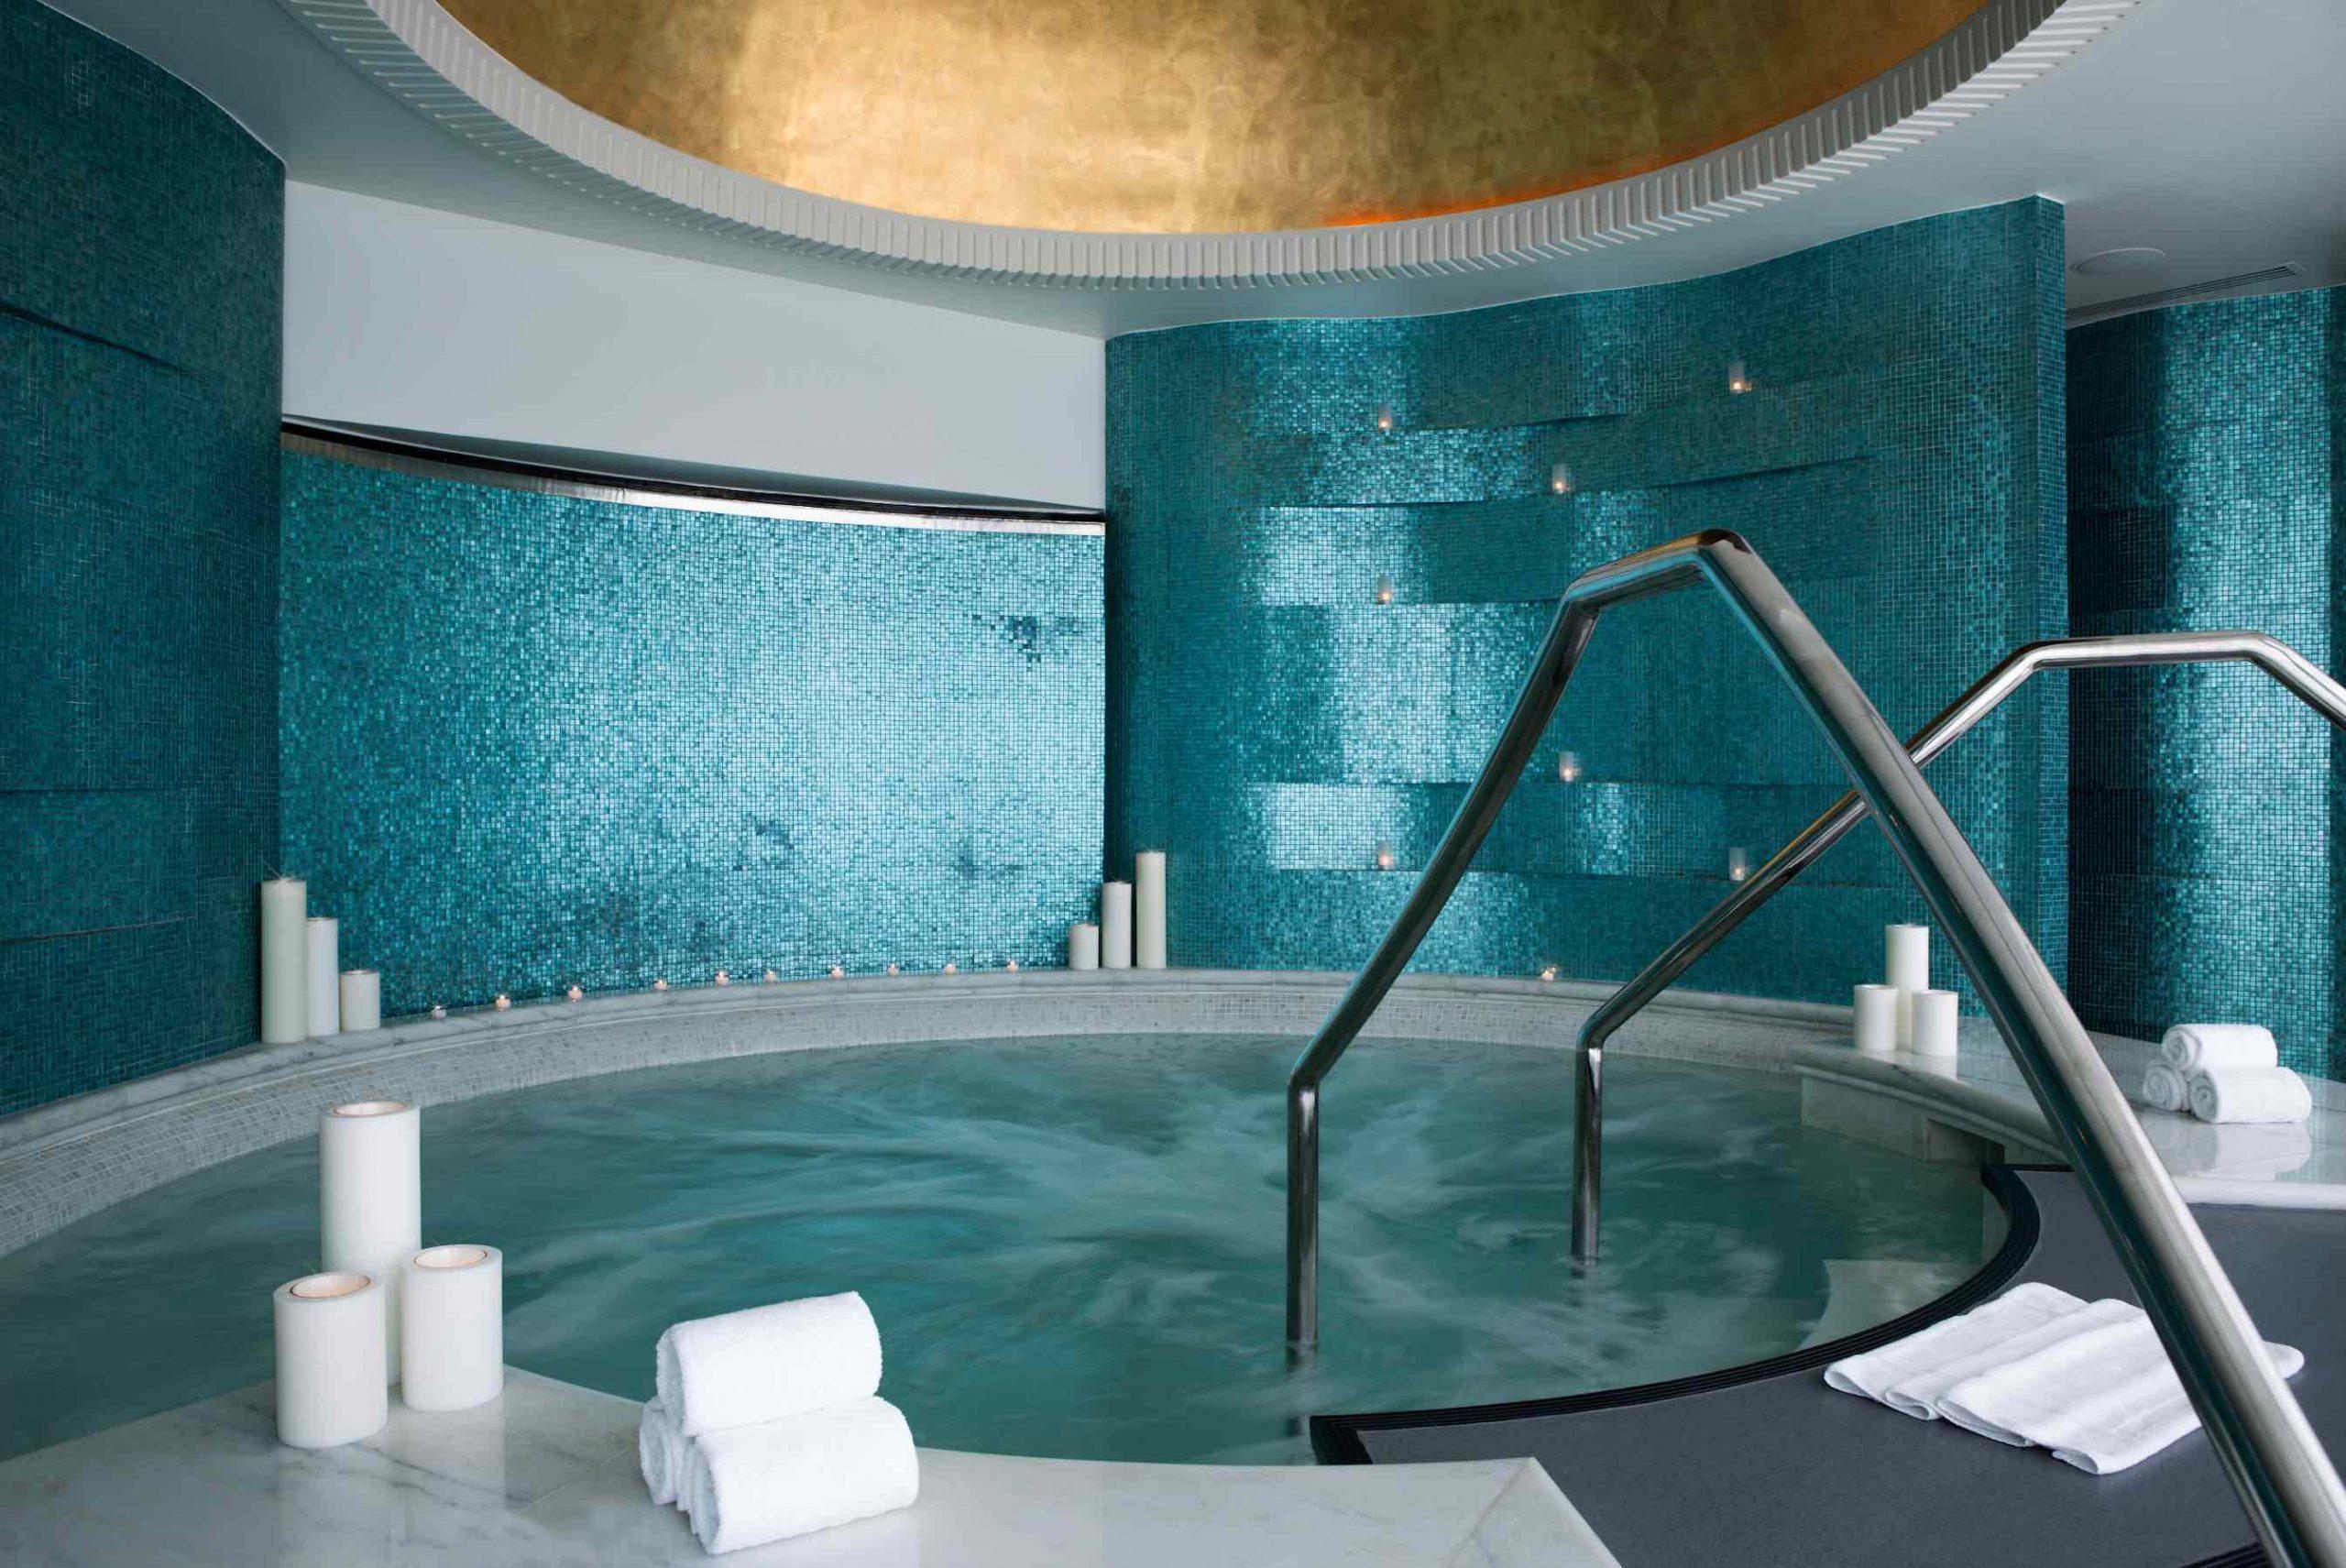 Surrender to serenity at The Spa at The St. Regis Abu Dhabi-image